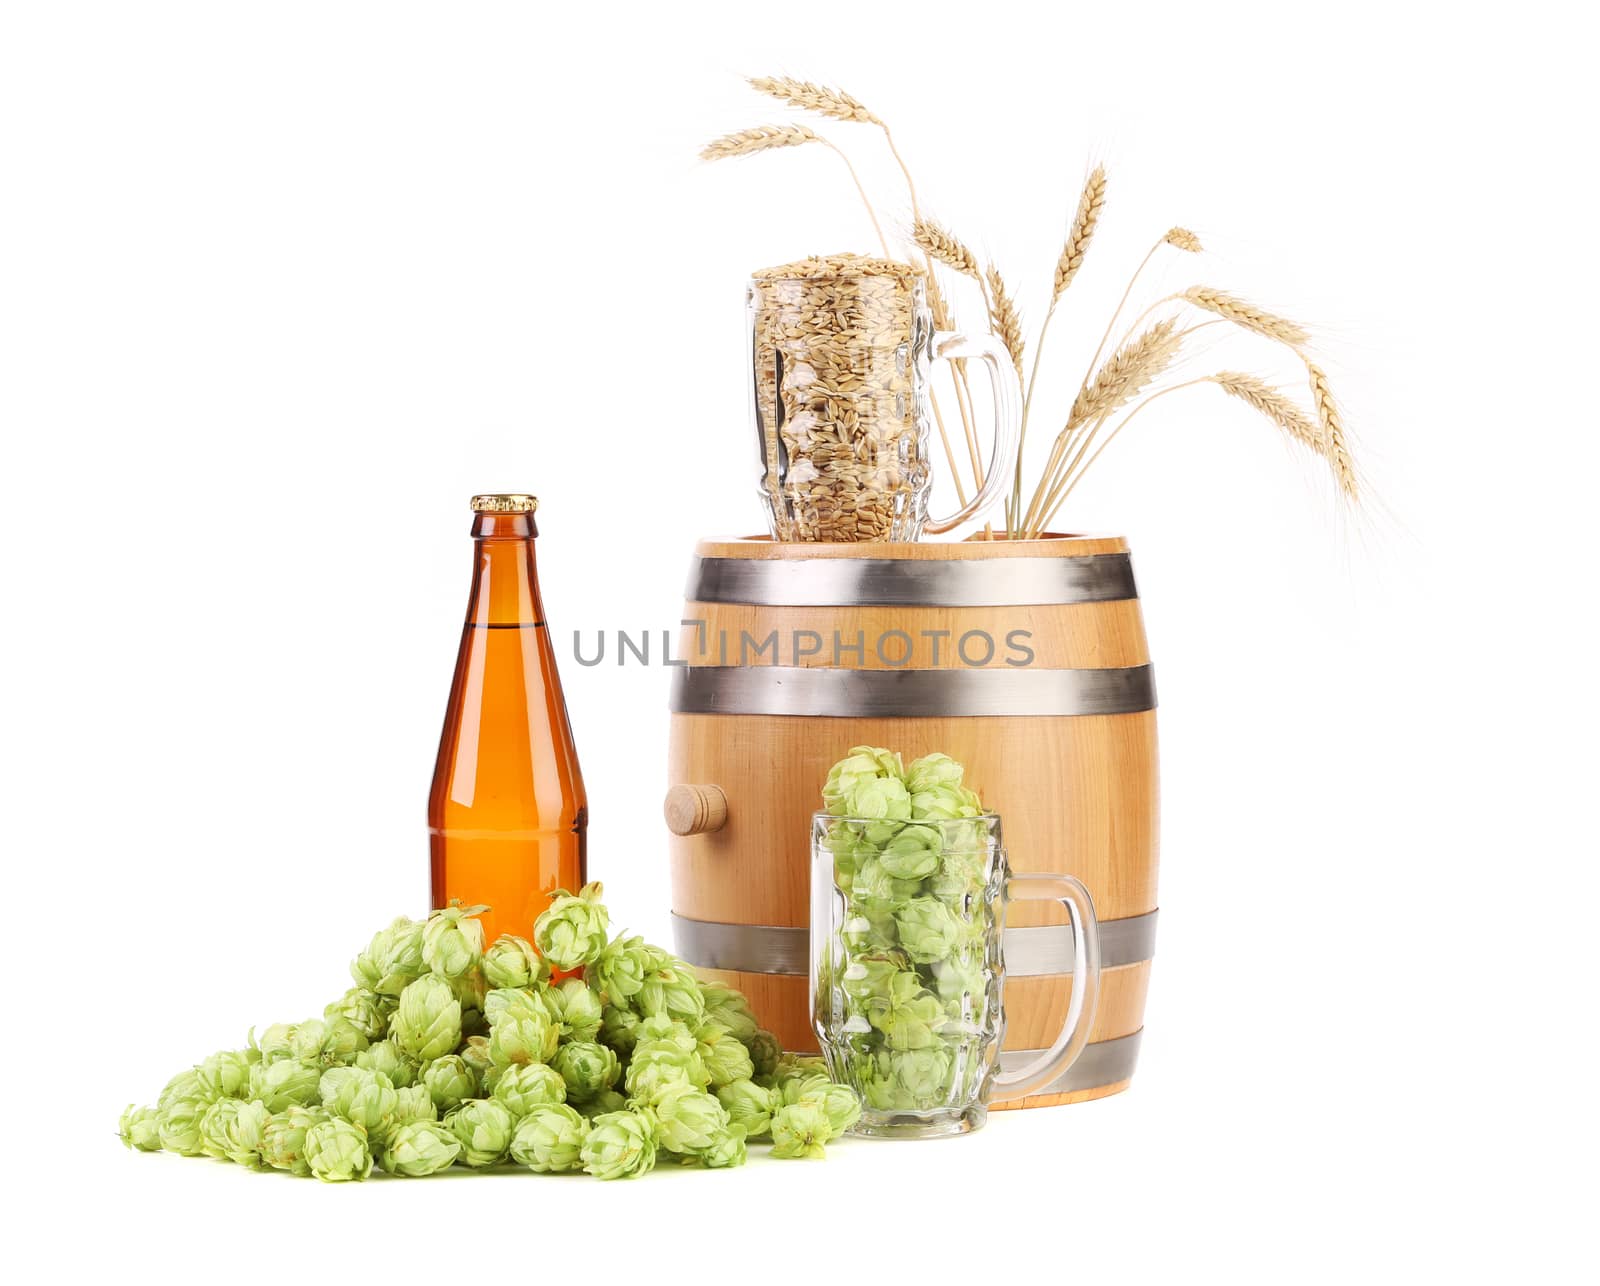 Barrel mug with hops and bottle of beer. Isolated on a white background.